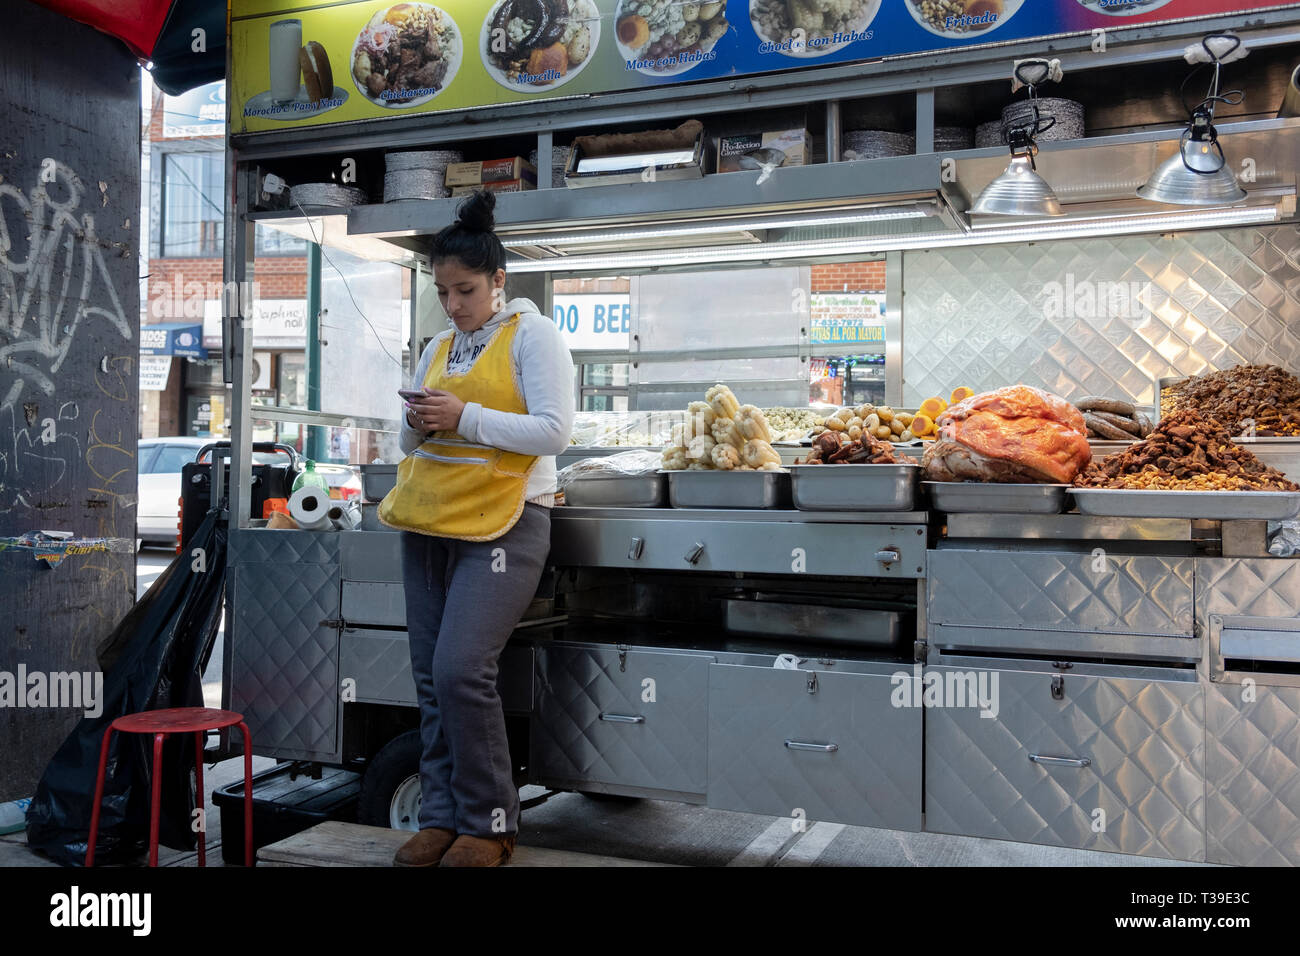 A South American woman selling grilled meats & other foods from a cart underneath the elevated subway trains . In Corona, Queens, NYC Stock Photo